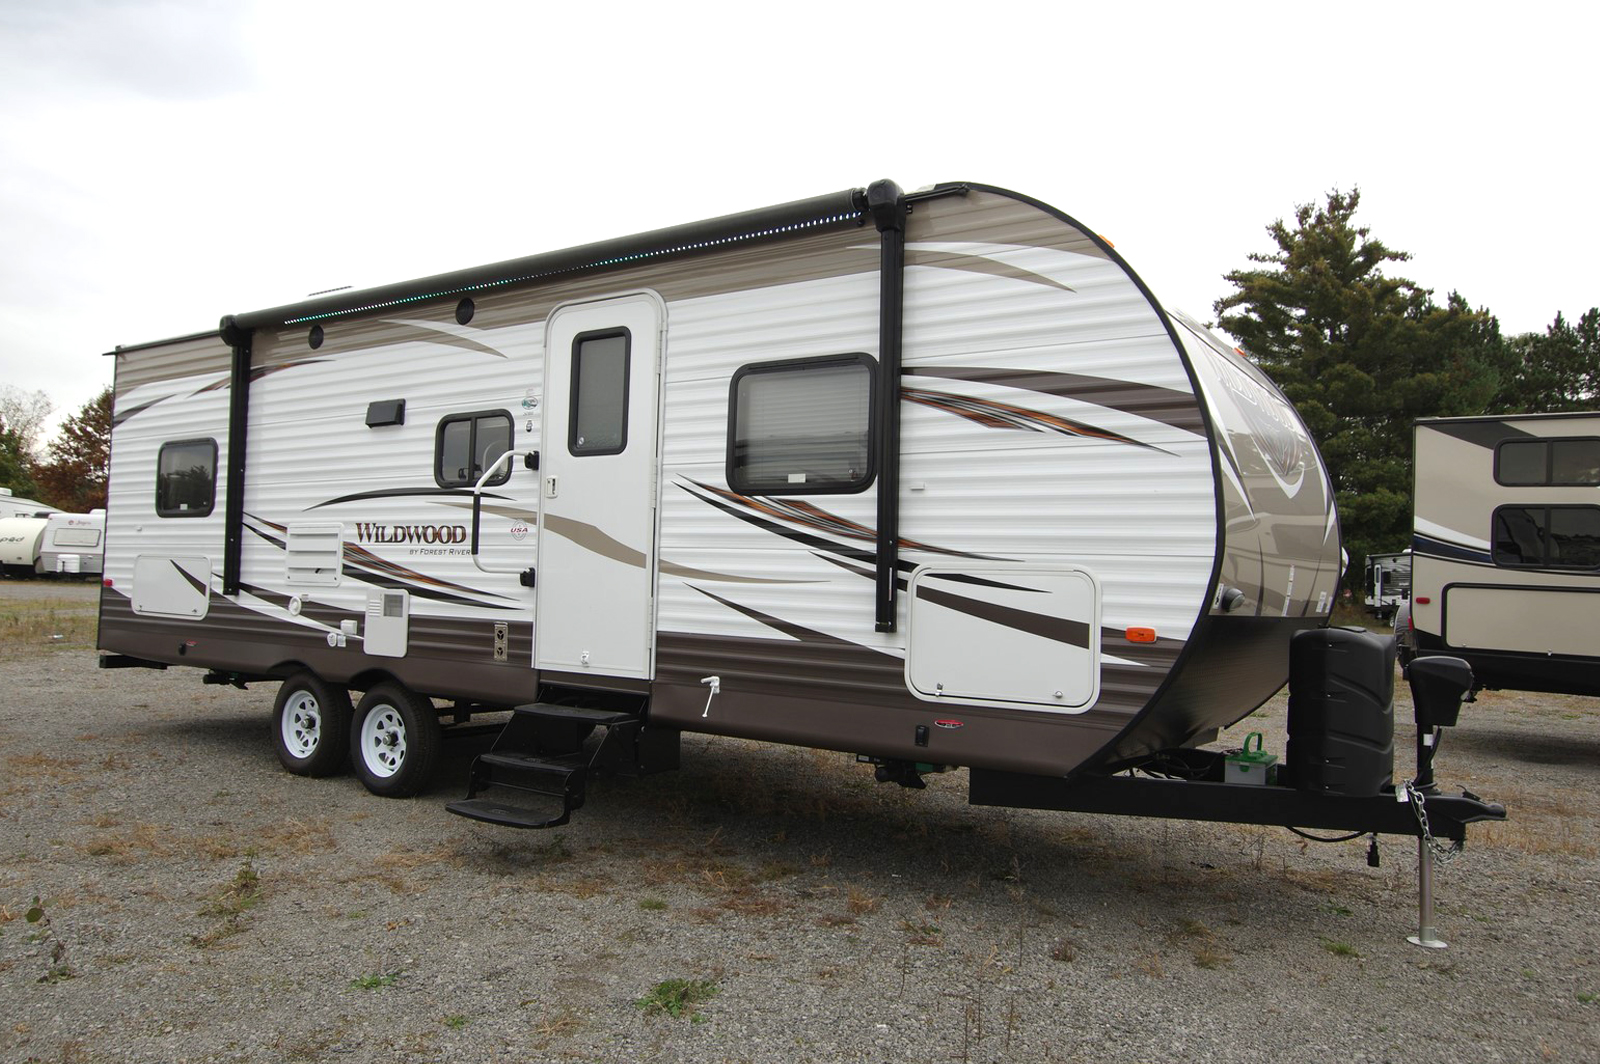 used rv for sale near me | Camper Photo Gallery Used Travel Trailer For Sale By Owner Near Me